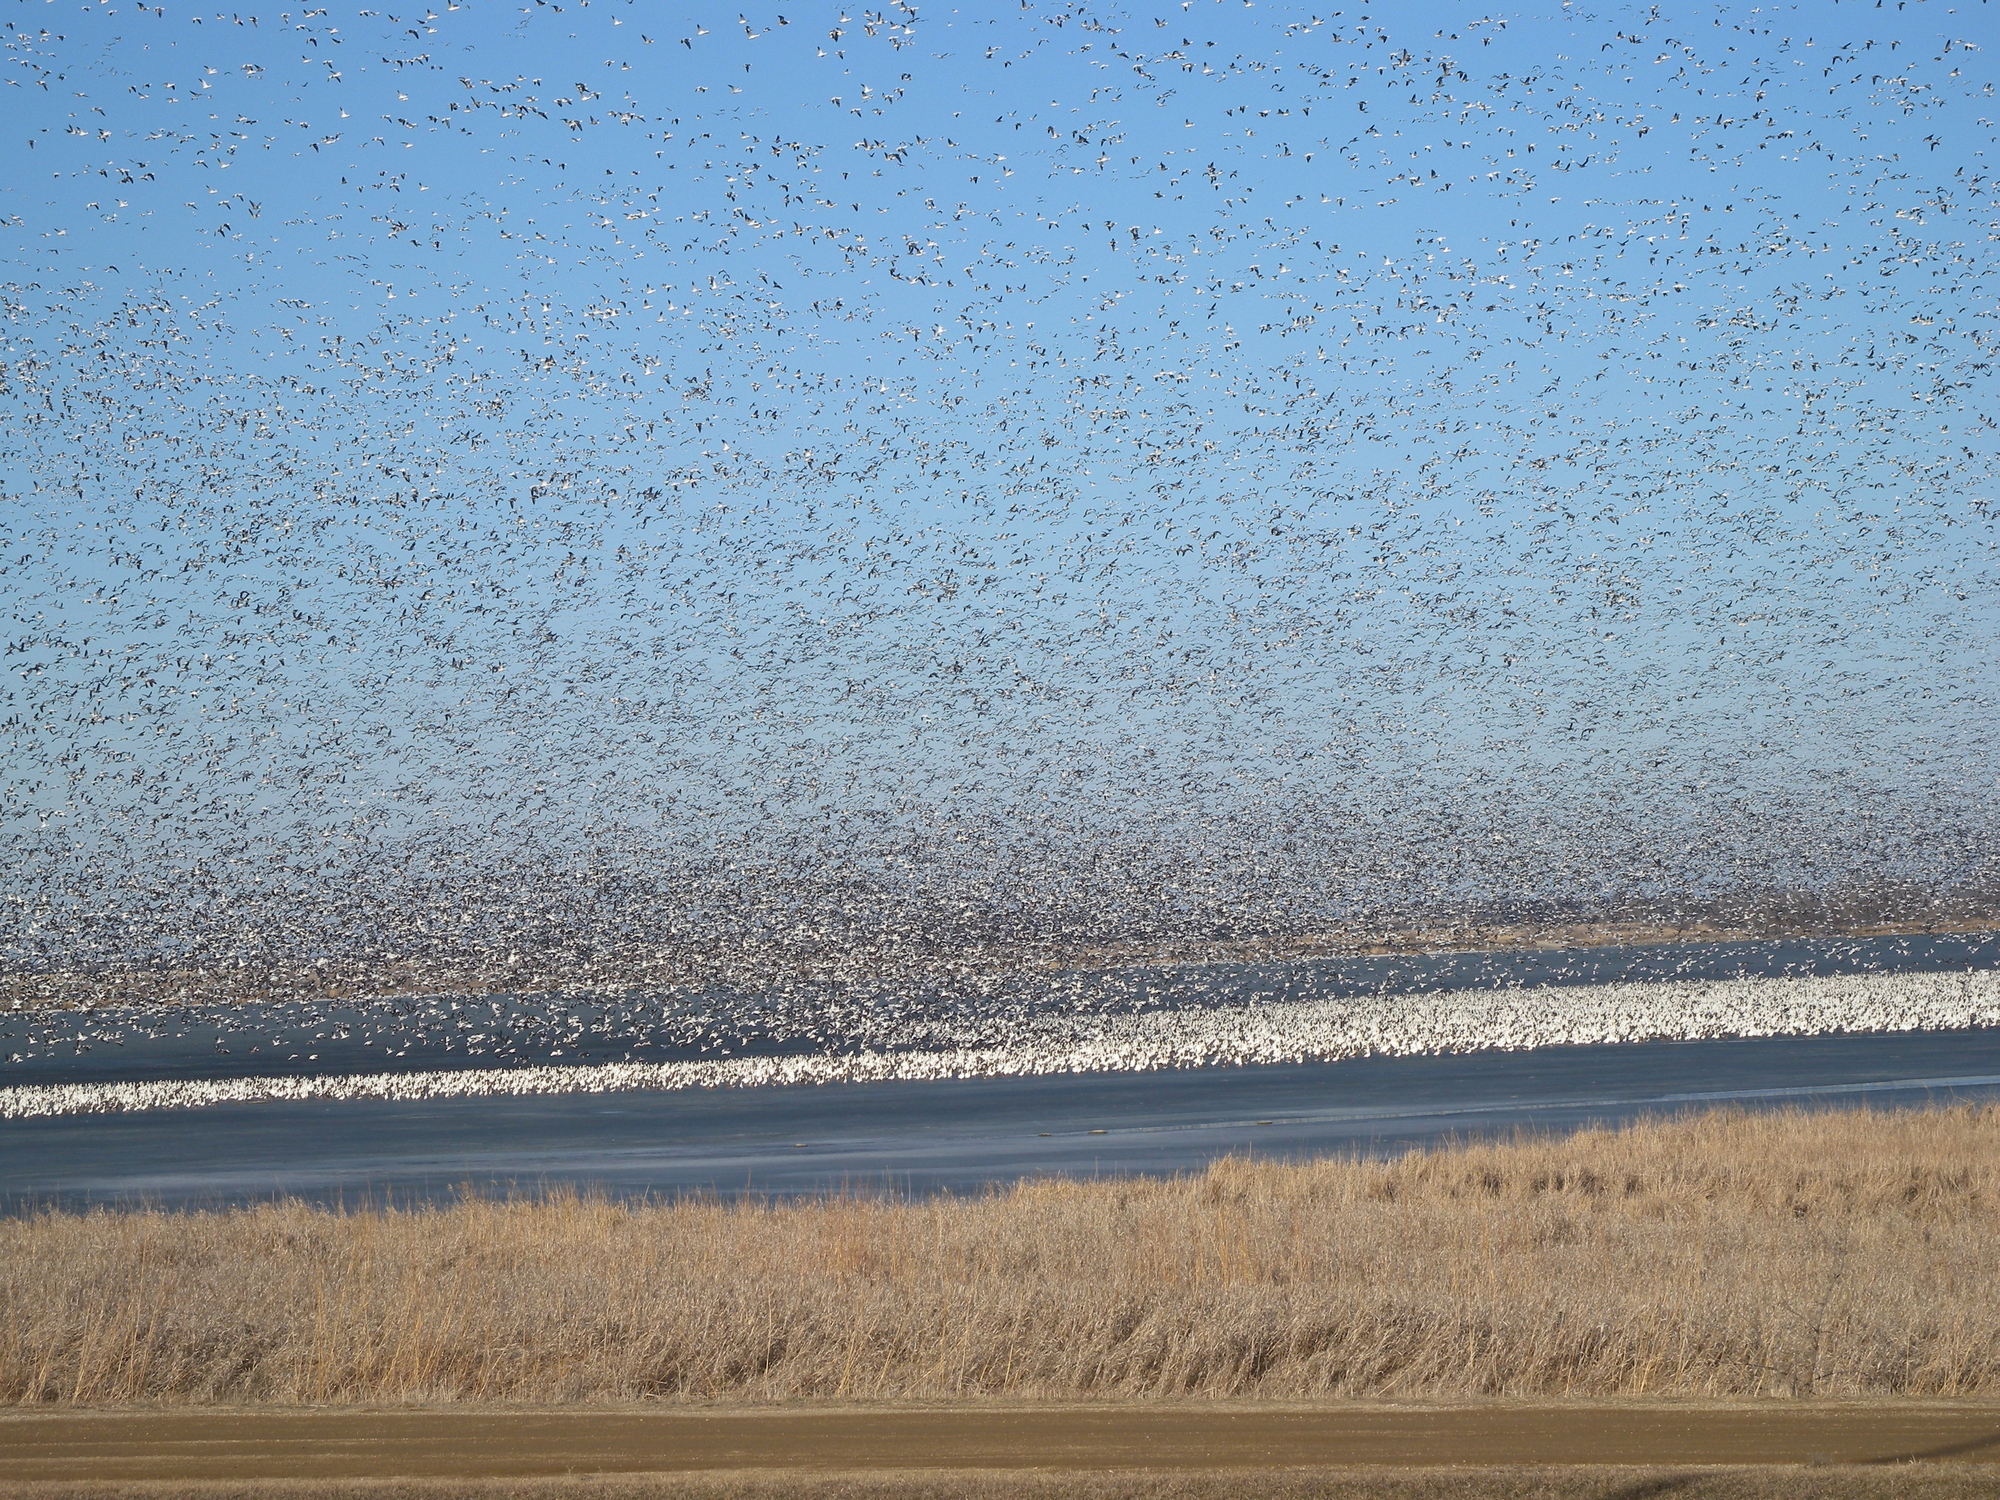 Millions of birds are set to begin migrating this spring and may carry disease that puts domestic birds at risk. (ND Tourism photo)